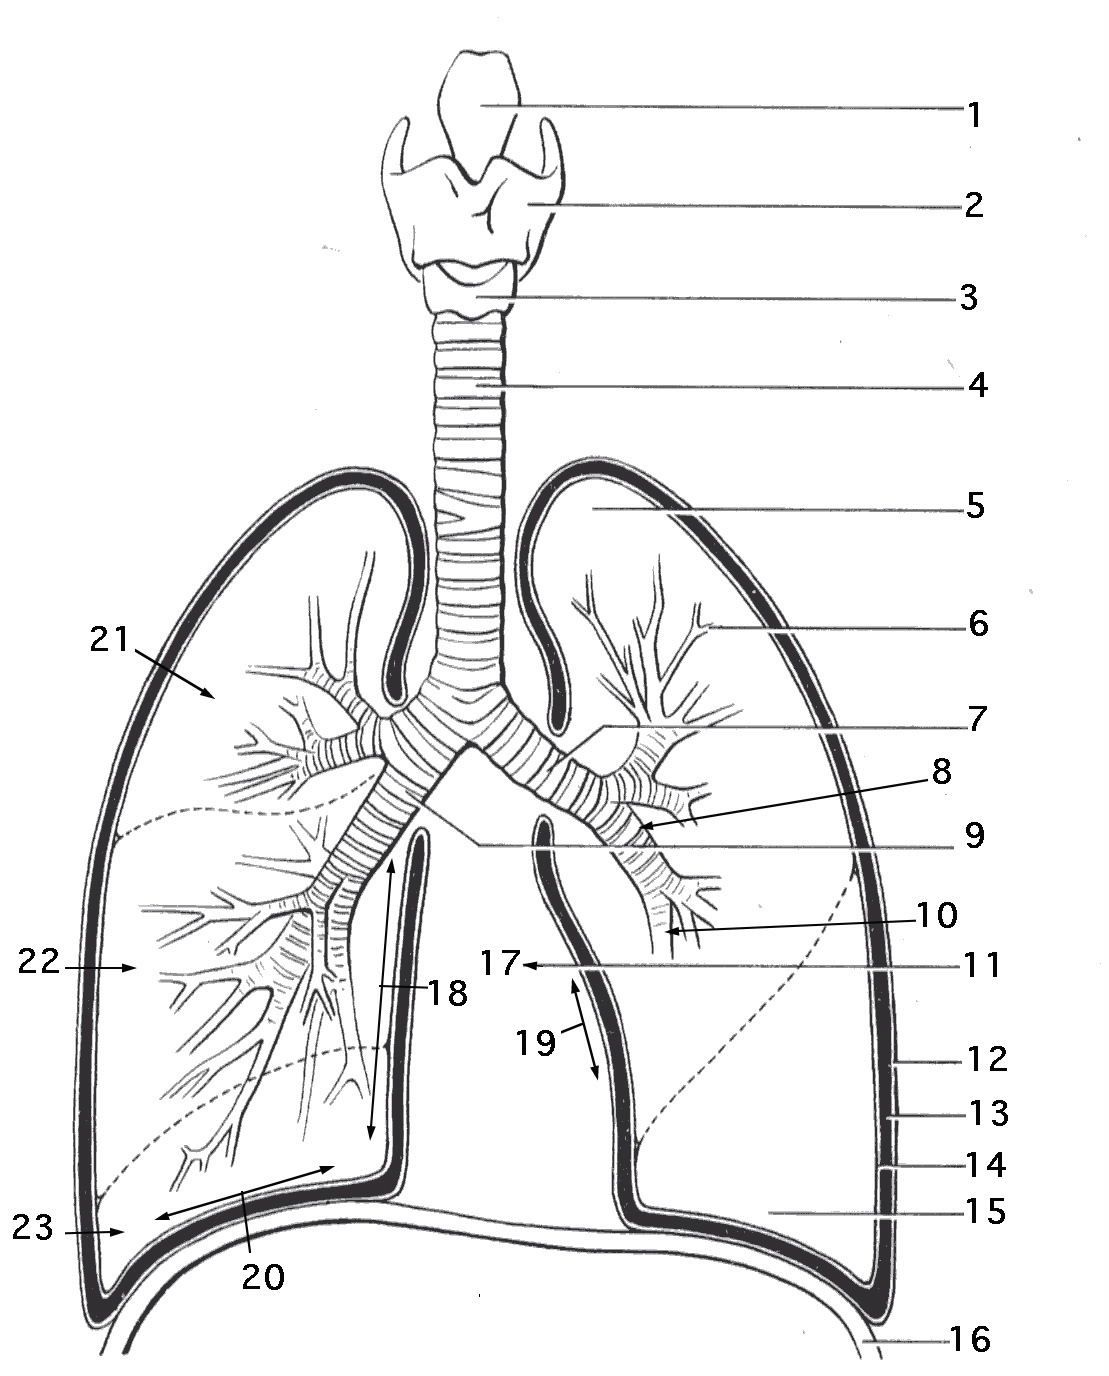 Lungs respiratory system coloring page work sheet for kids